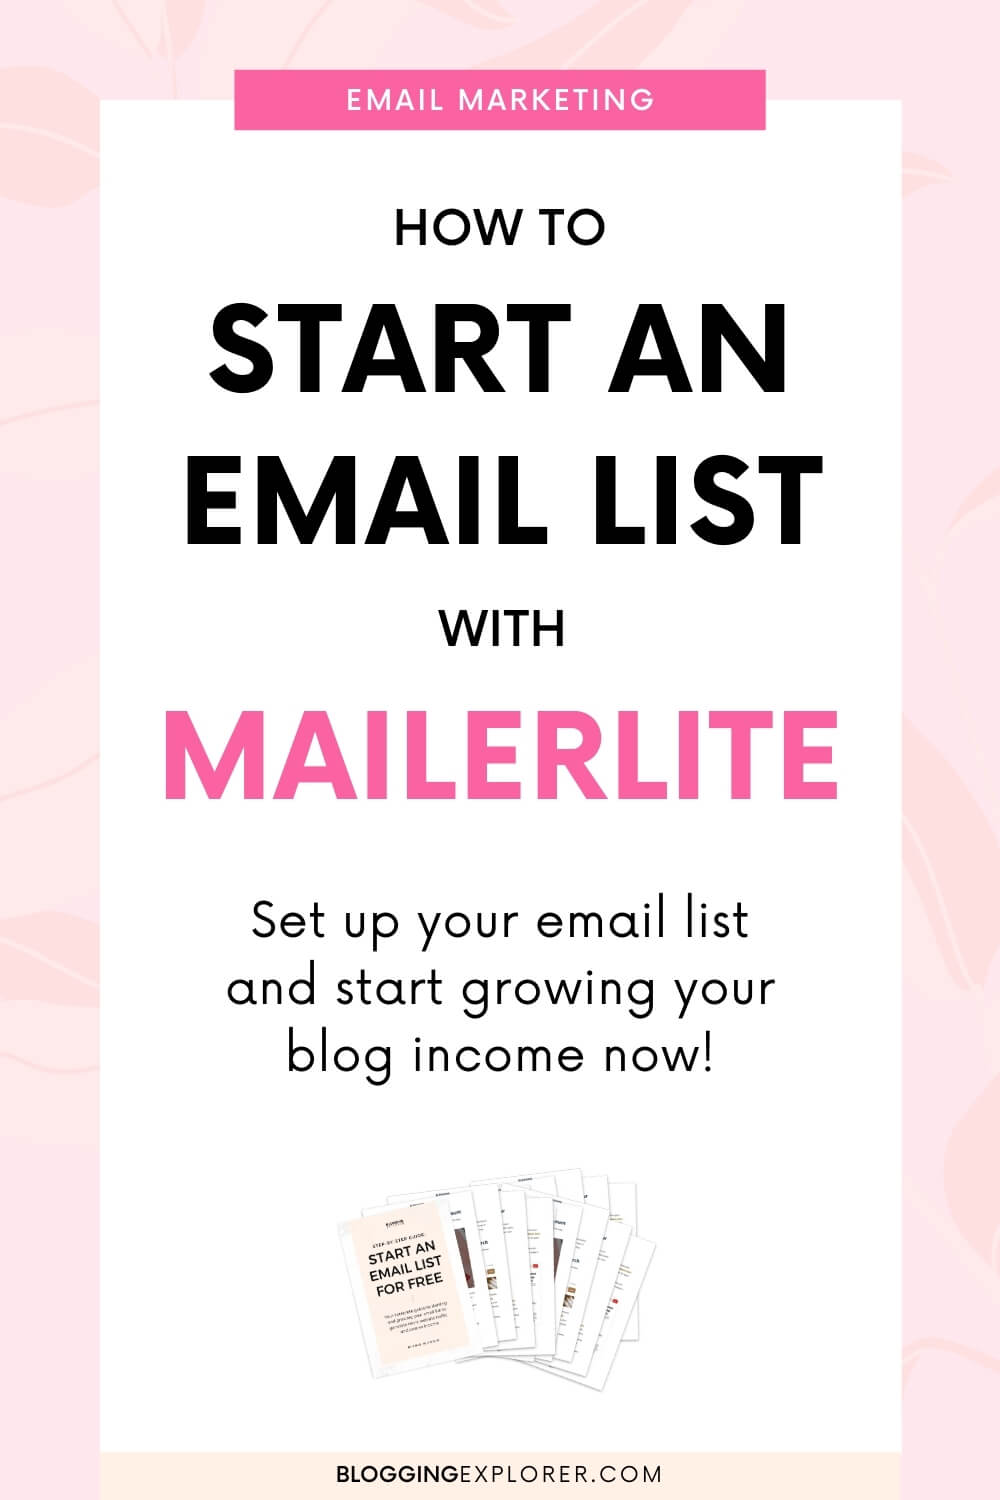 MailerLite Review for Bloggers: Why I Switched and Love It